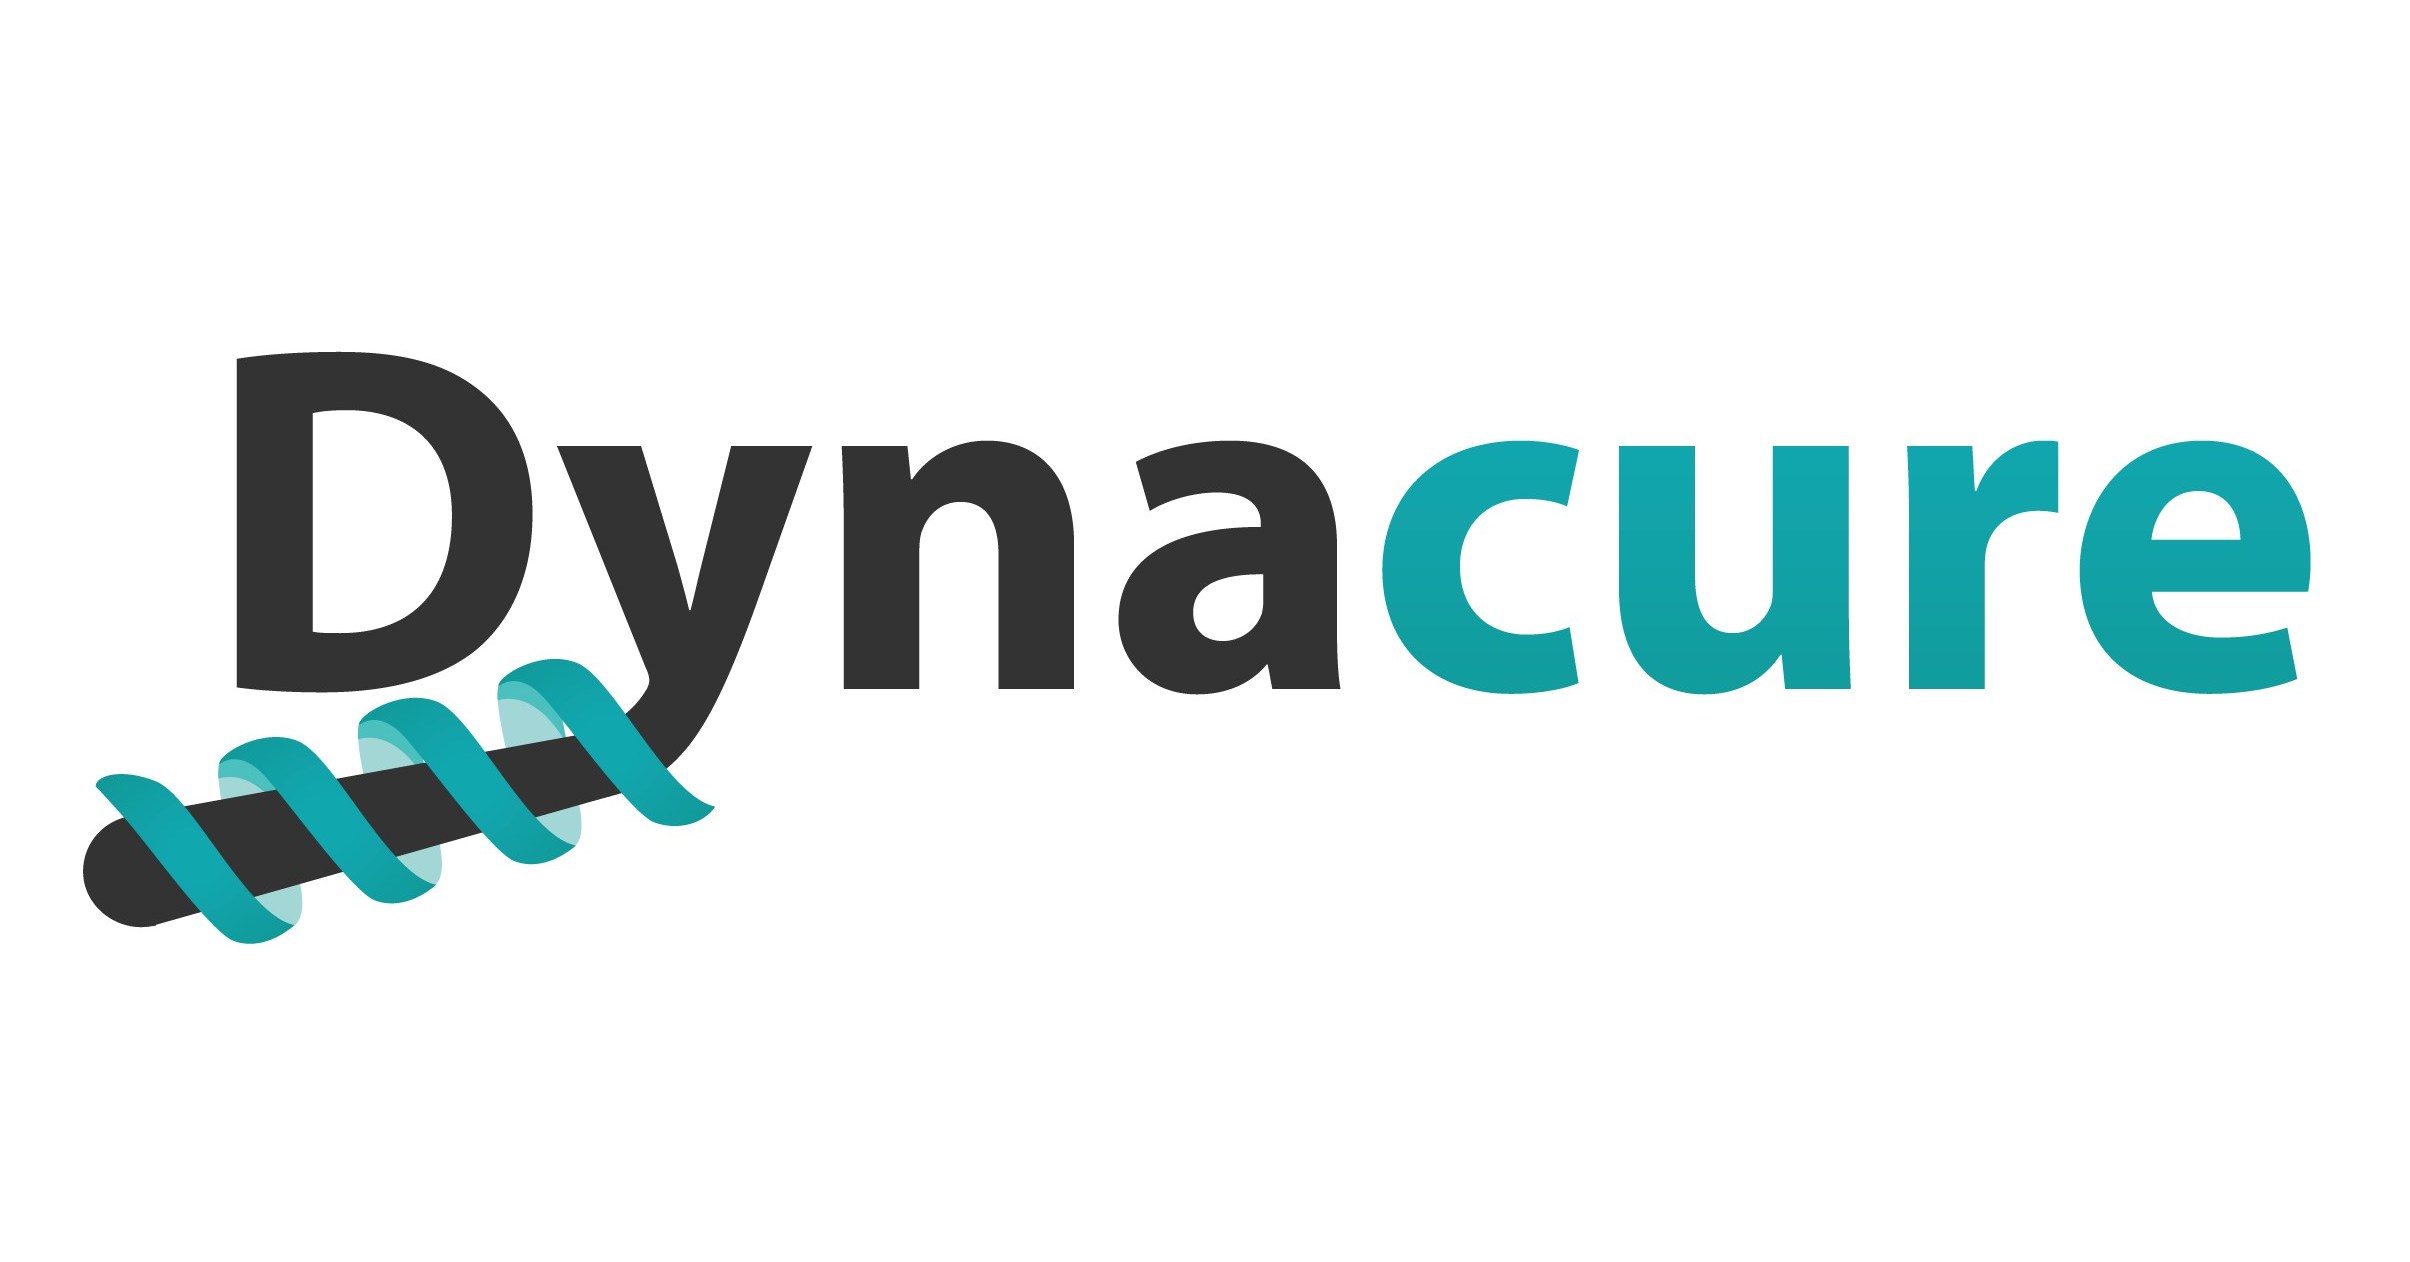 Dynacure